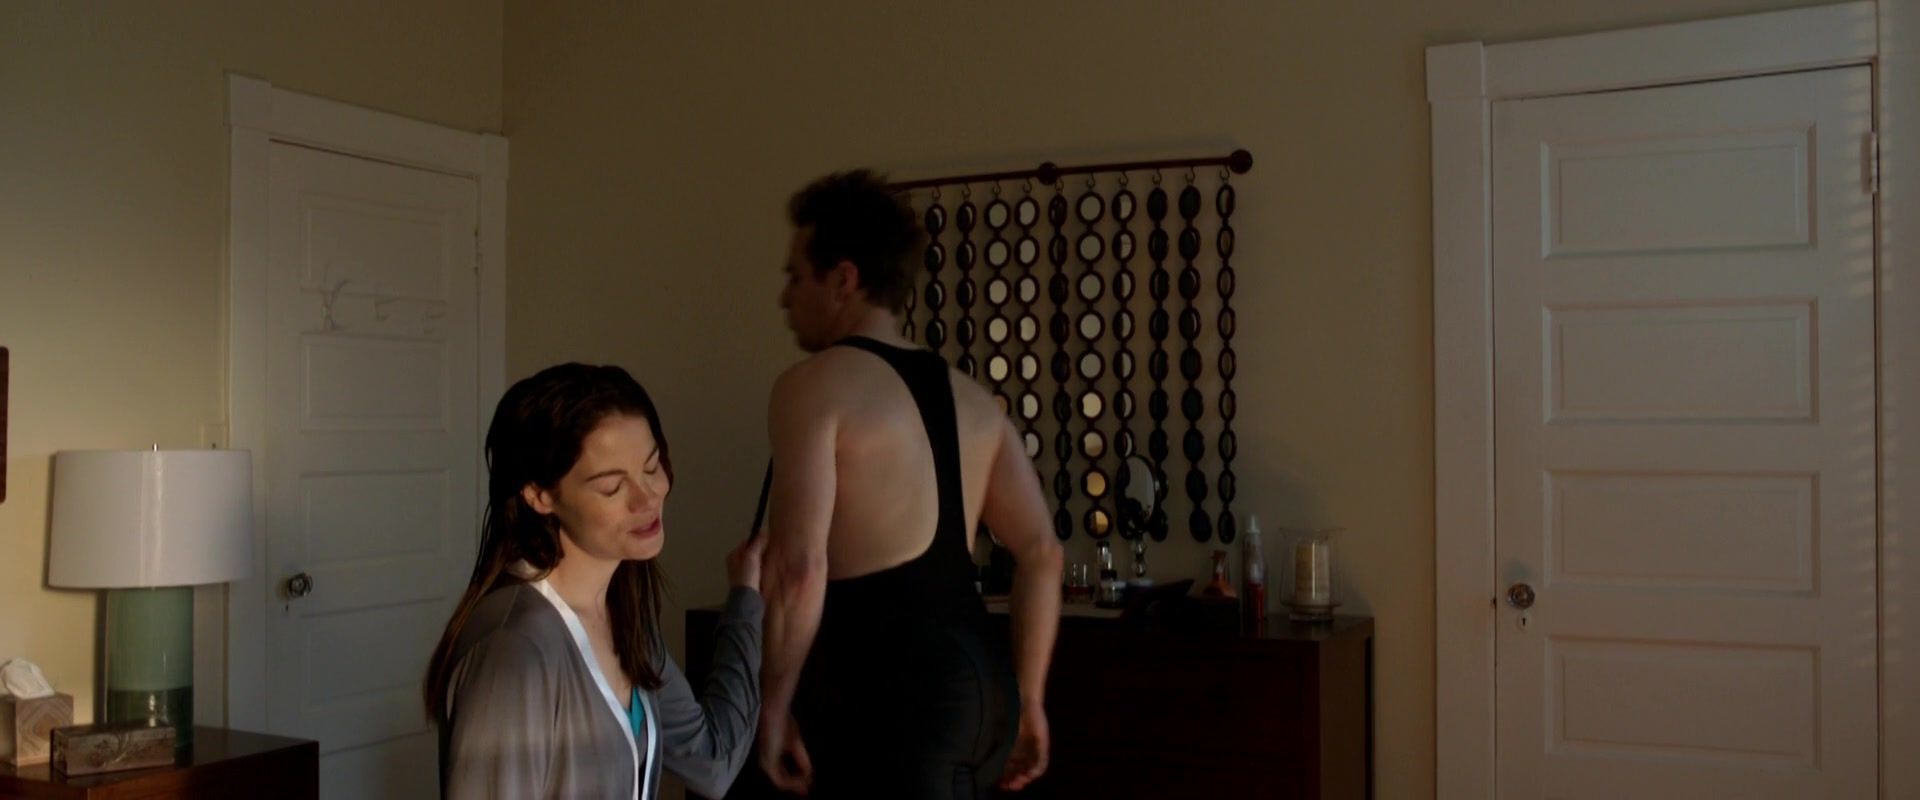 Pov Blowjob Sexy Olivia Wilde, Michelle Monaghan nude - Better Living Through Chemistry (2014) Tiny Tits